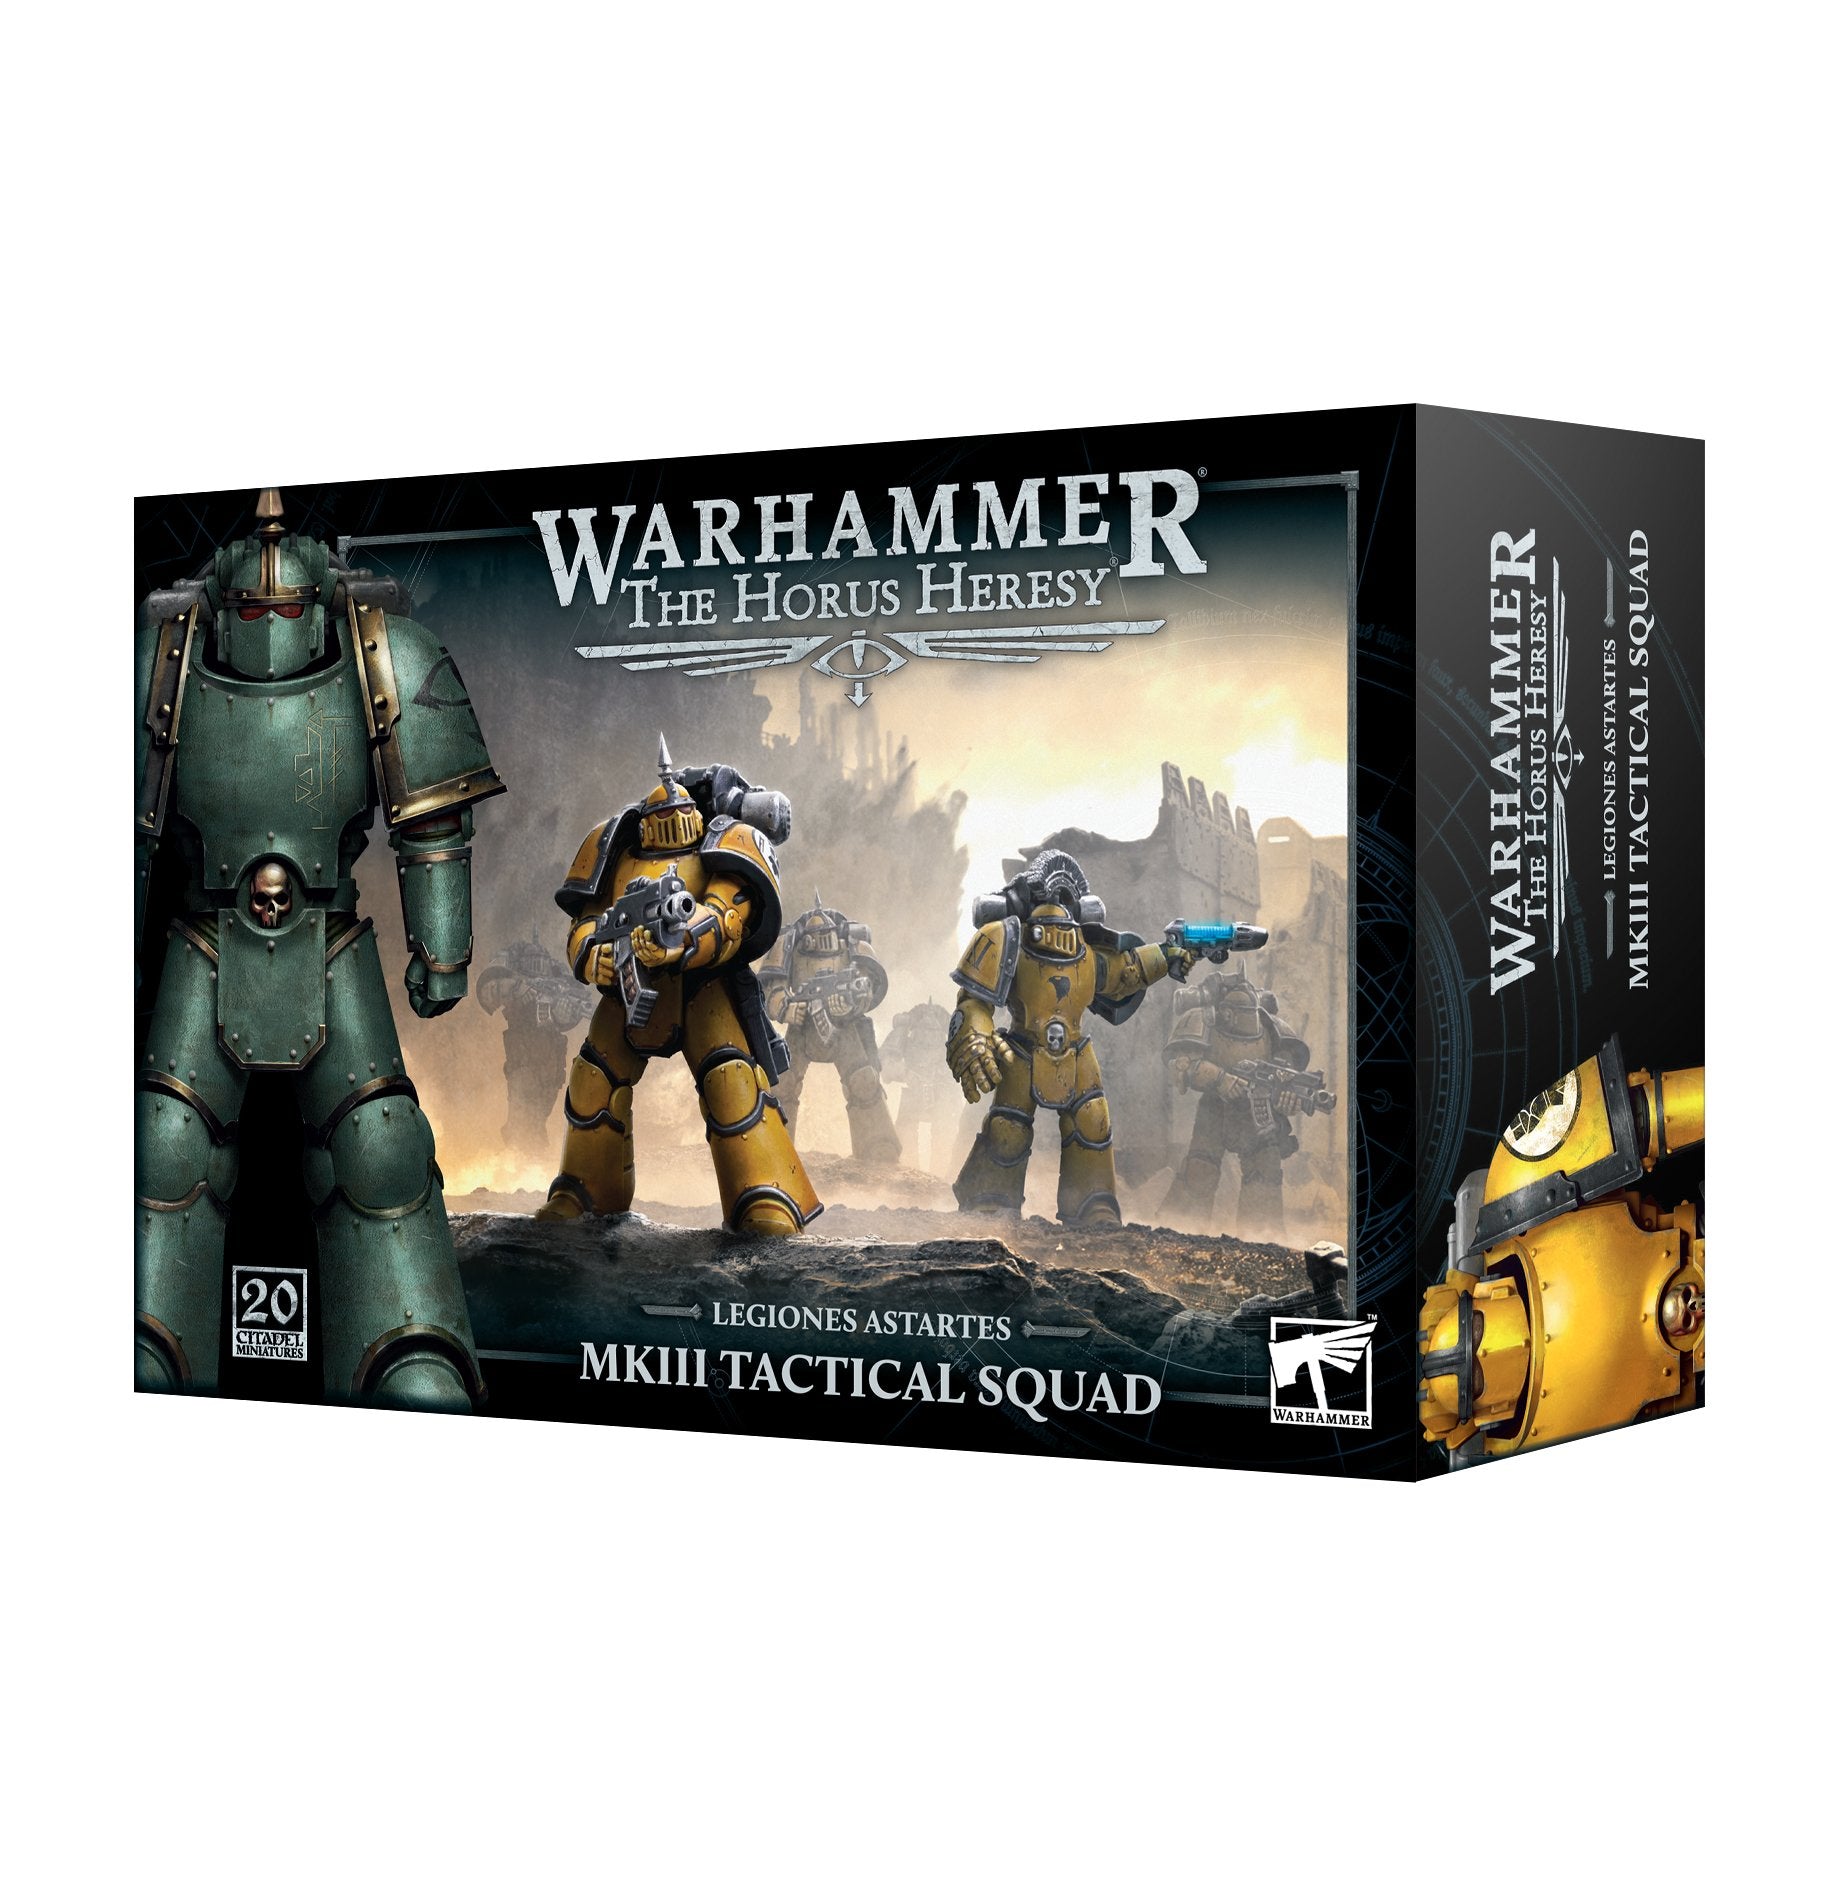 Horus Heresy: Legiones Astartes MKIII Tactical Squad - Release Date 28/10/23 - Loaded Dice Barry Vale of Glamorgan CF64 3HD